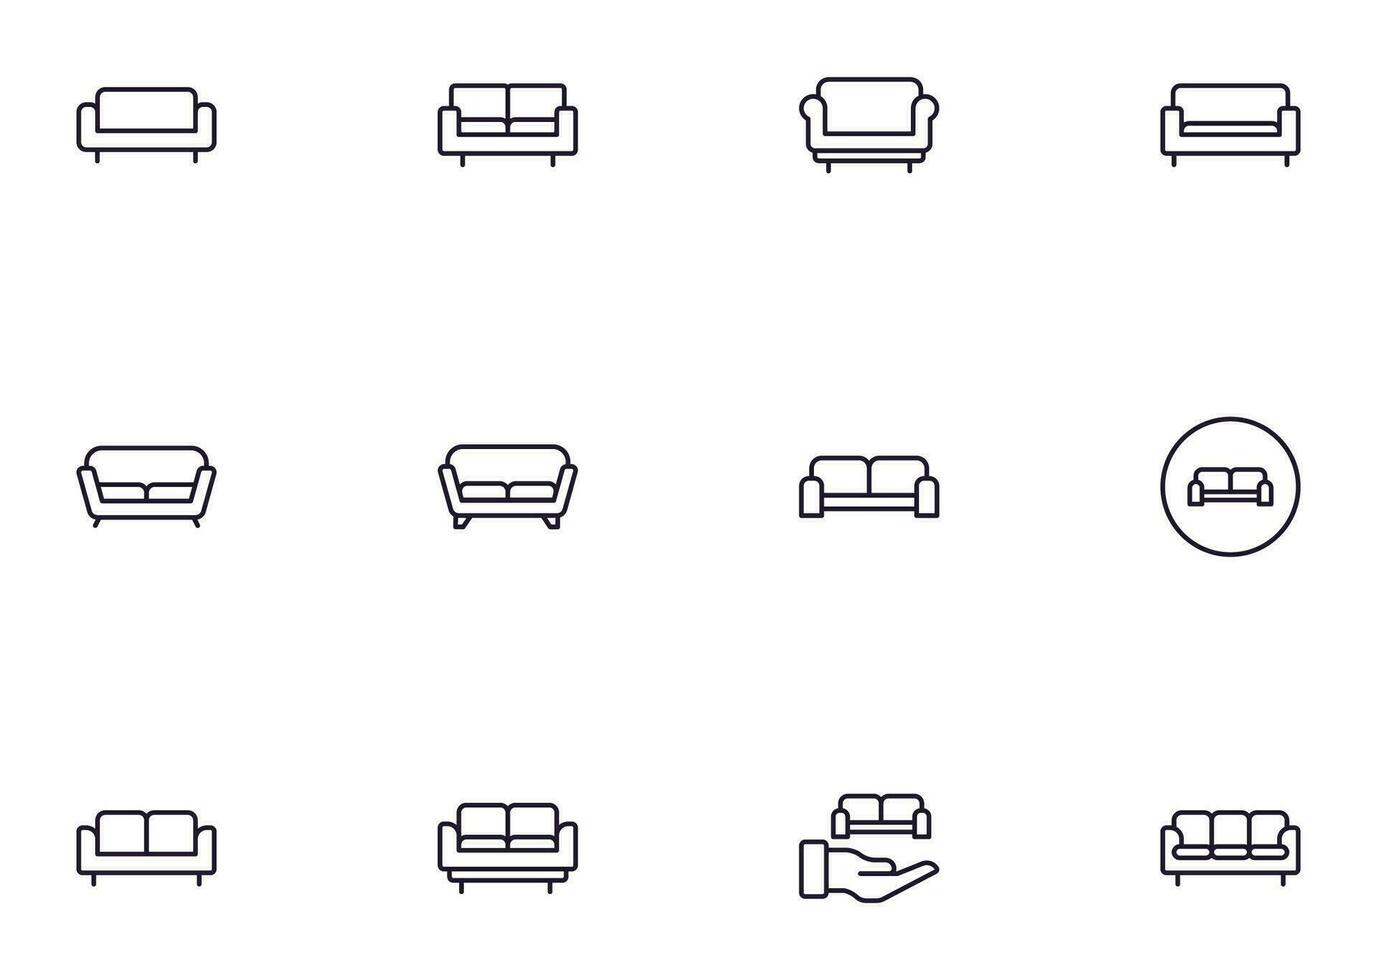 Sofa concept. Sofa line icon set. Collection of vector signs in trendy flat style for web sites, internet shops and stores, books and flyers. Premium quality icons isolated on white background